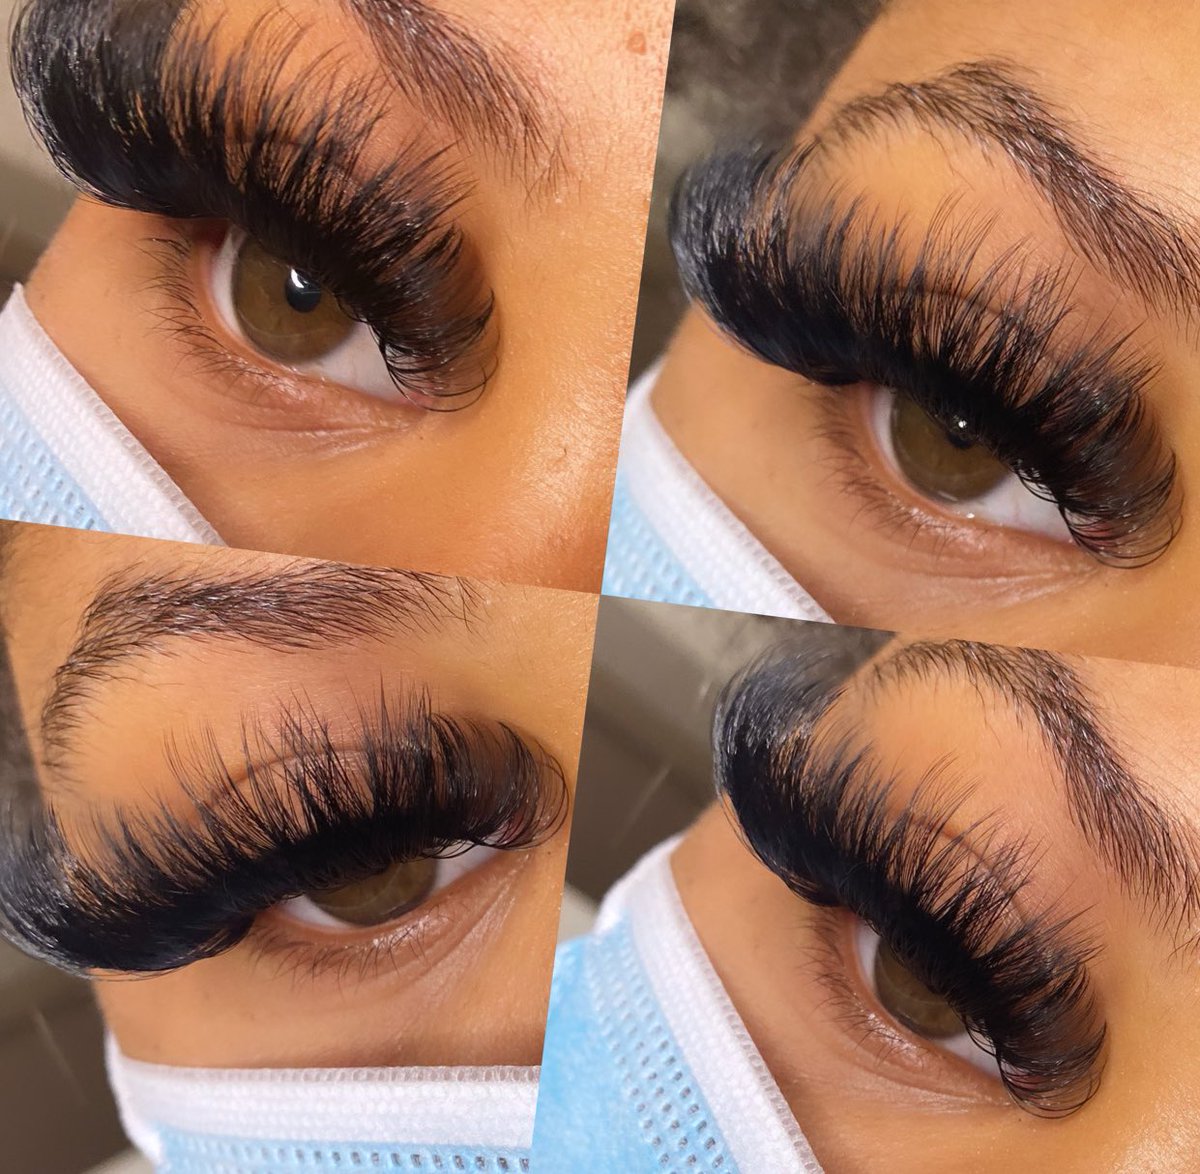 Its the length for me 🔥
First time trying 25mm

This set is bomb 
Book with me , Appointments Available 💥
#tatyblashes #lashes #lashextensions #lashesonfleek #fluffiana #volumelashes #volumeset #25mmlashes #fluffy